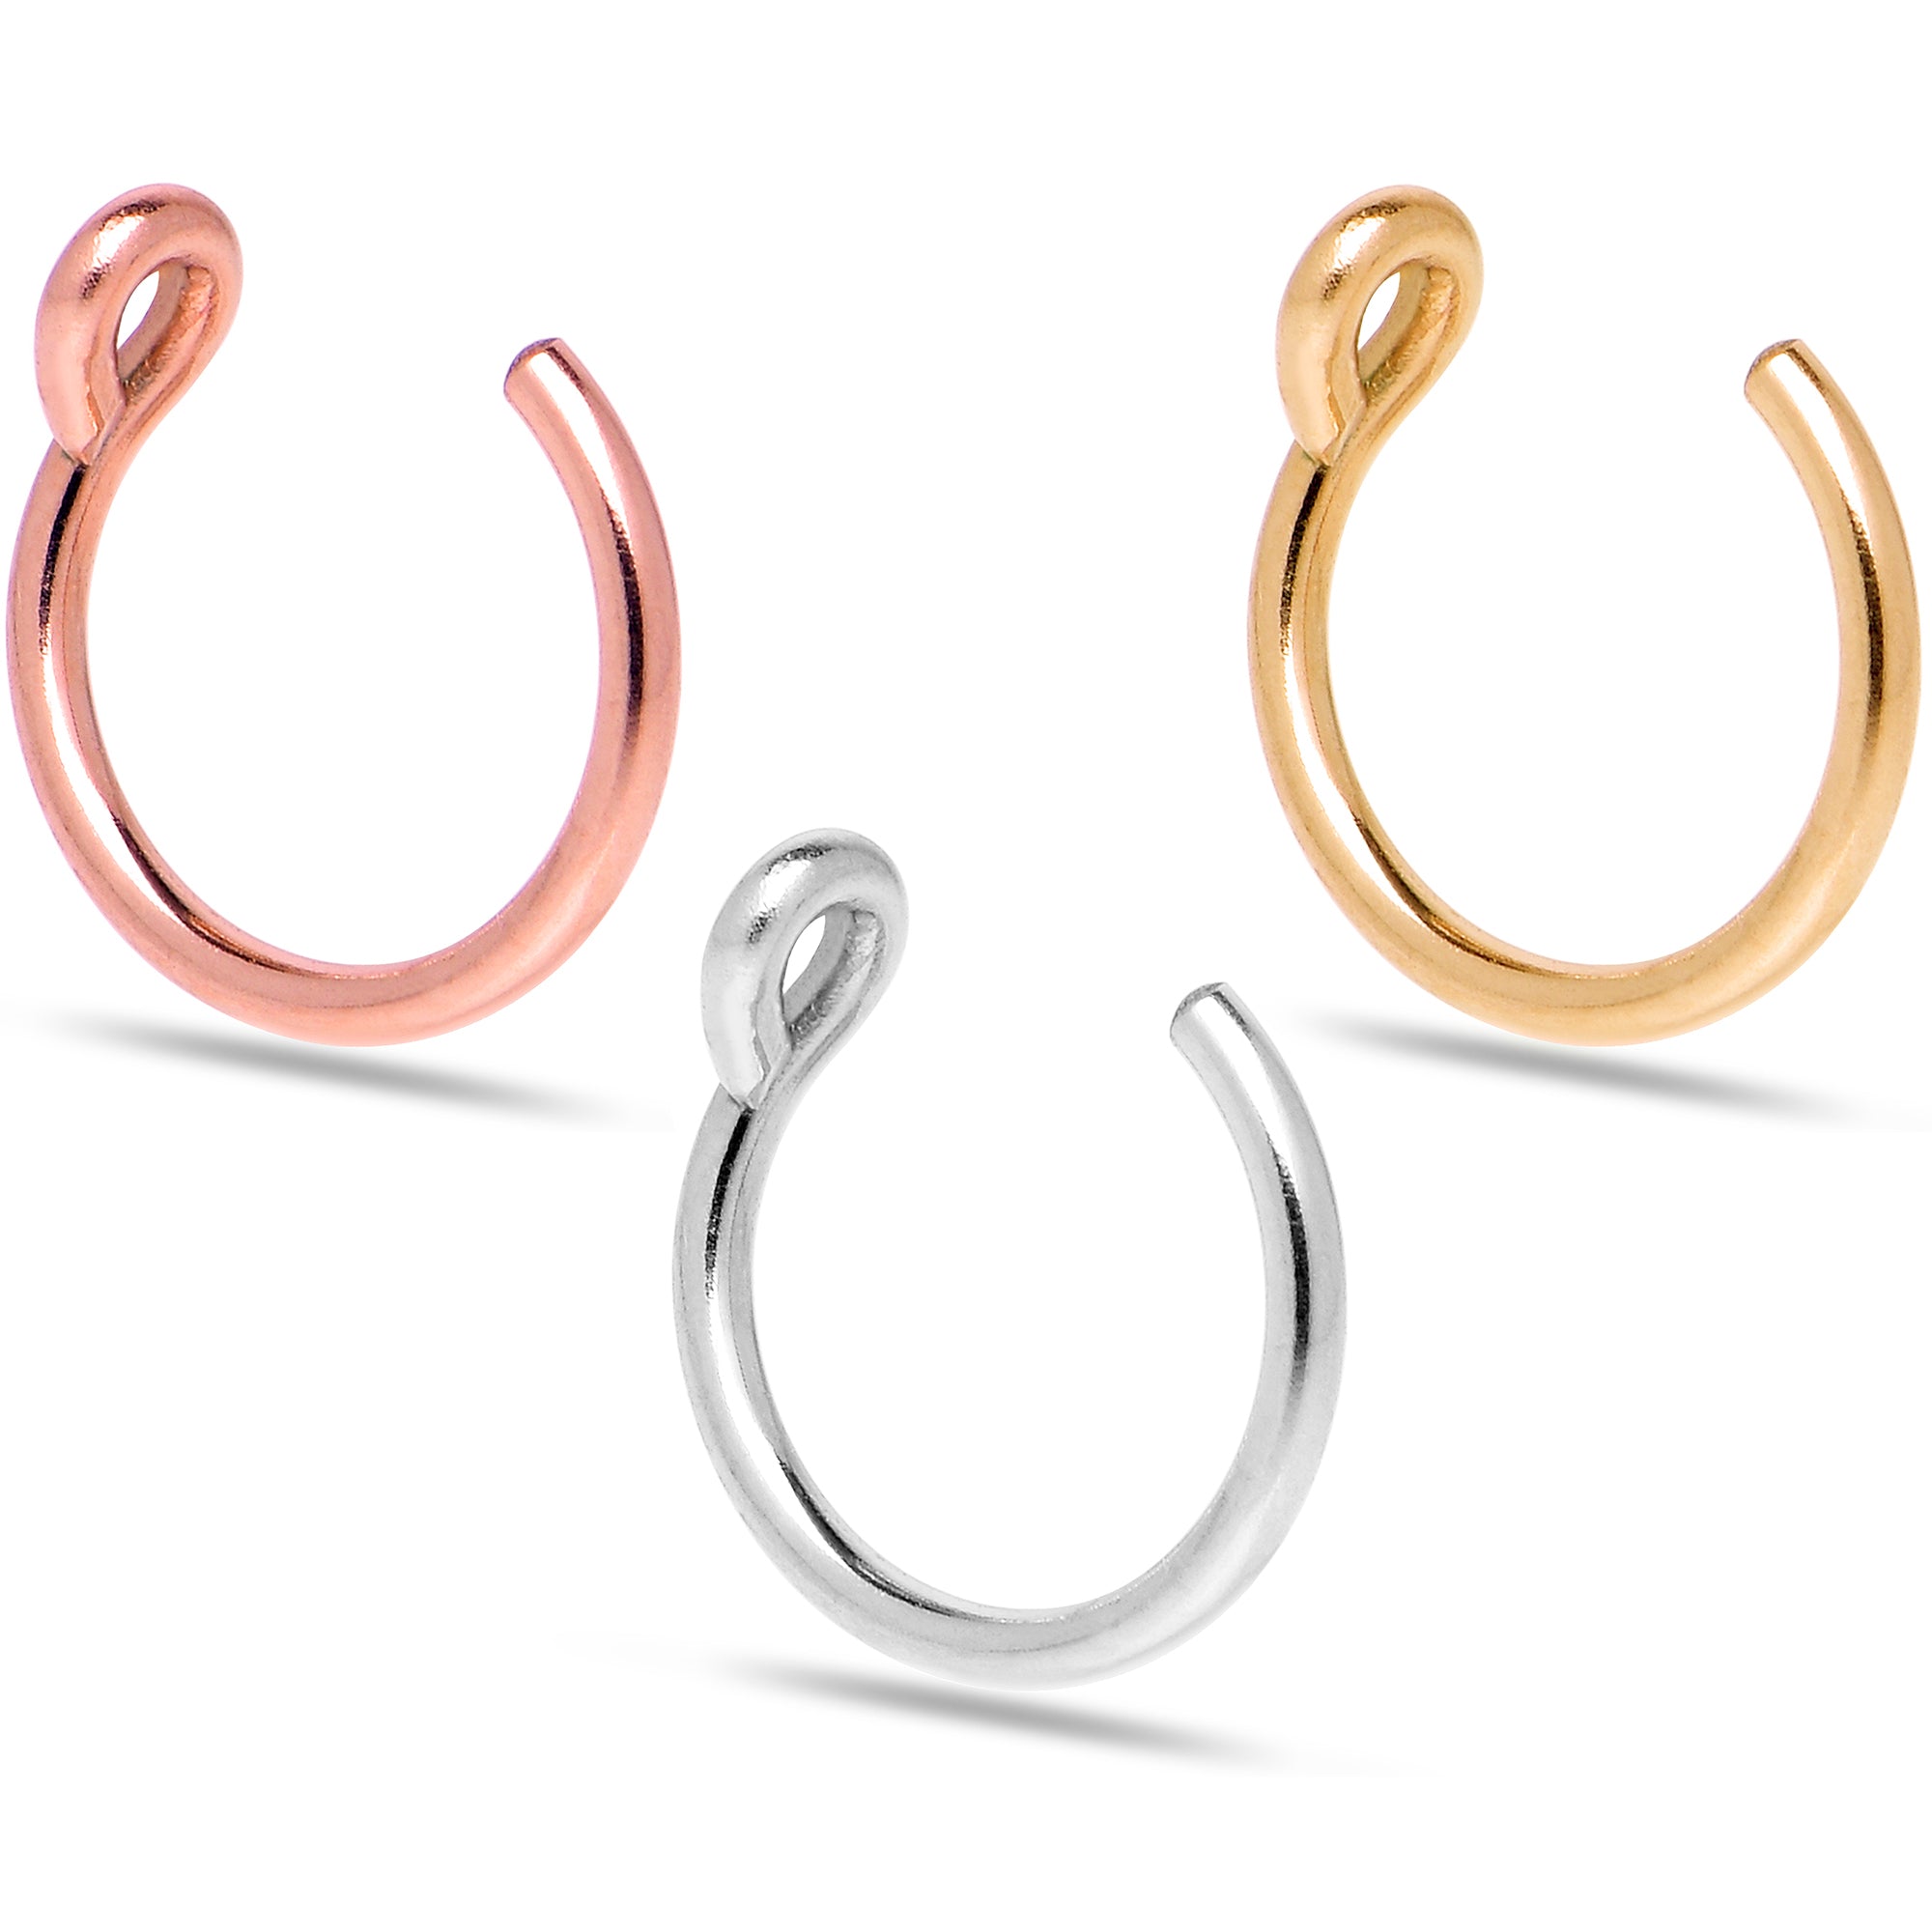 3 Pack 14k Gold Filled and 925 Silver Fake Nose Rings